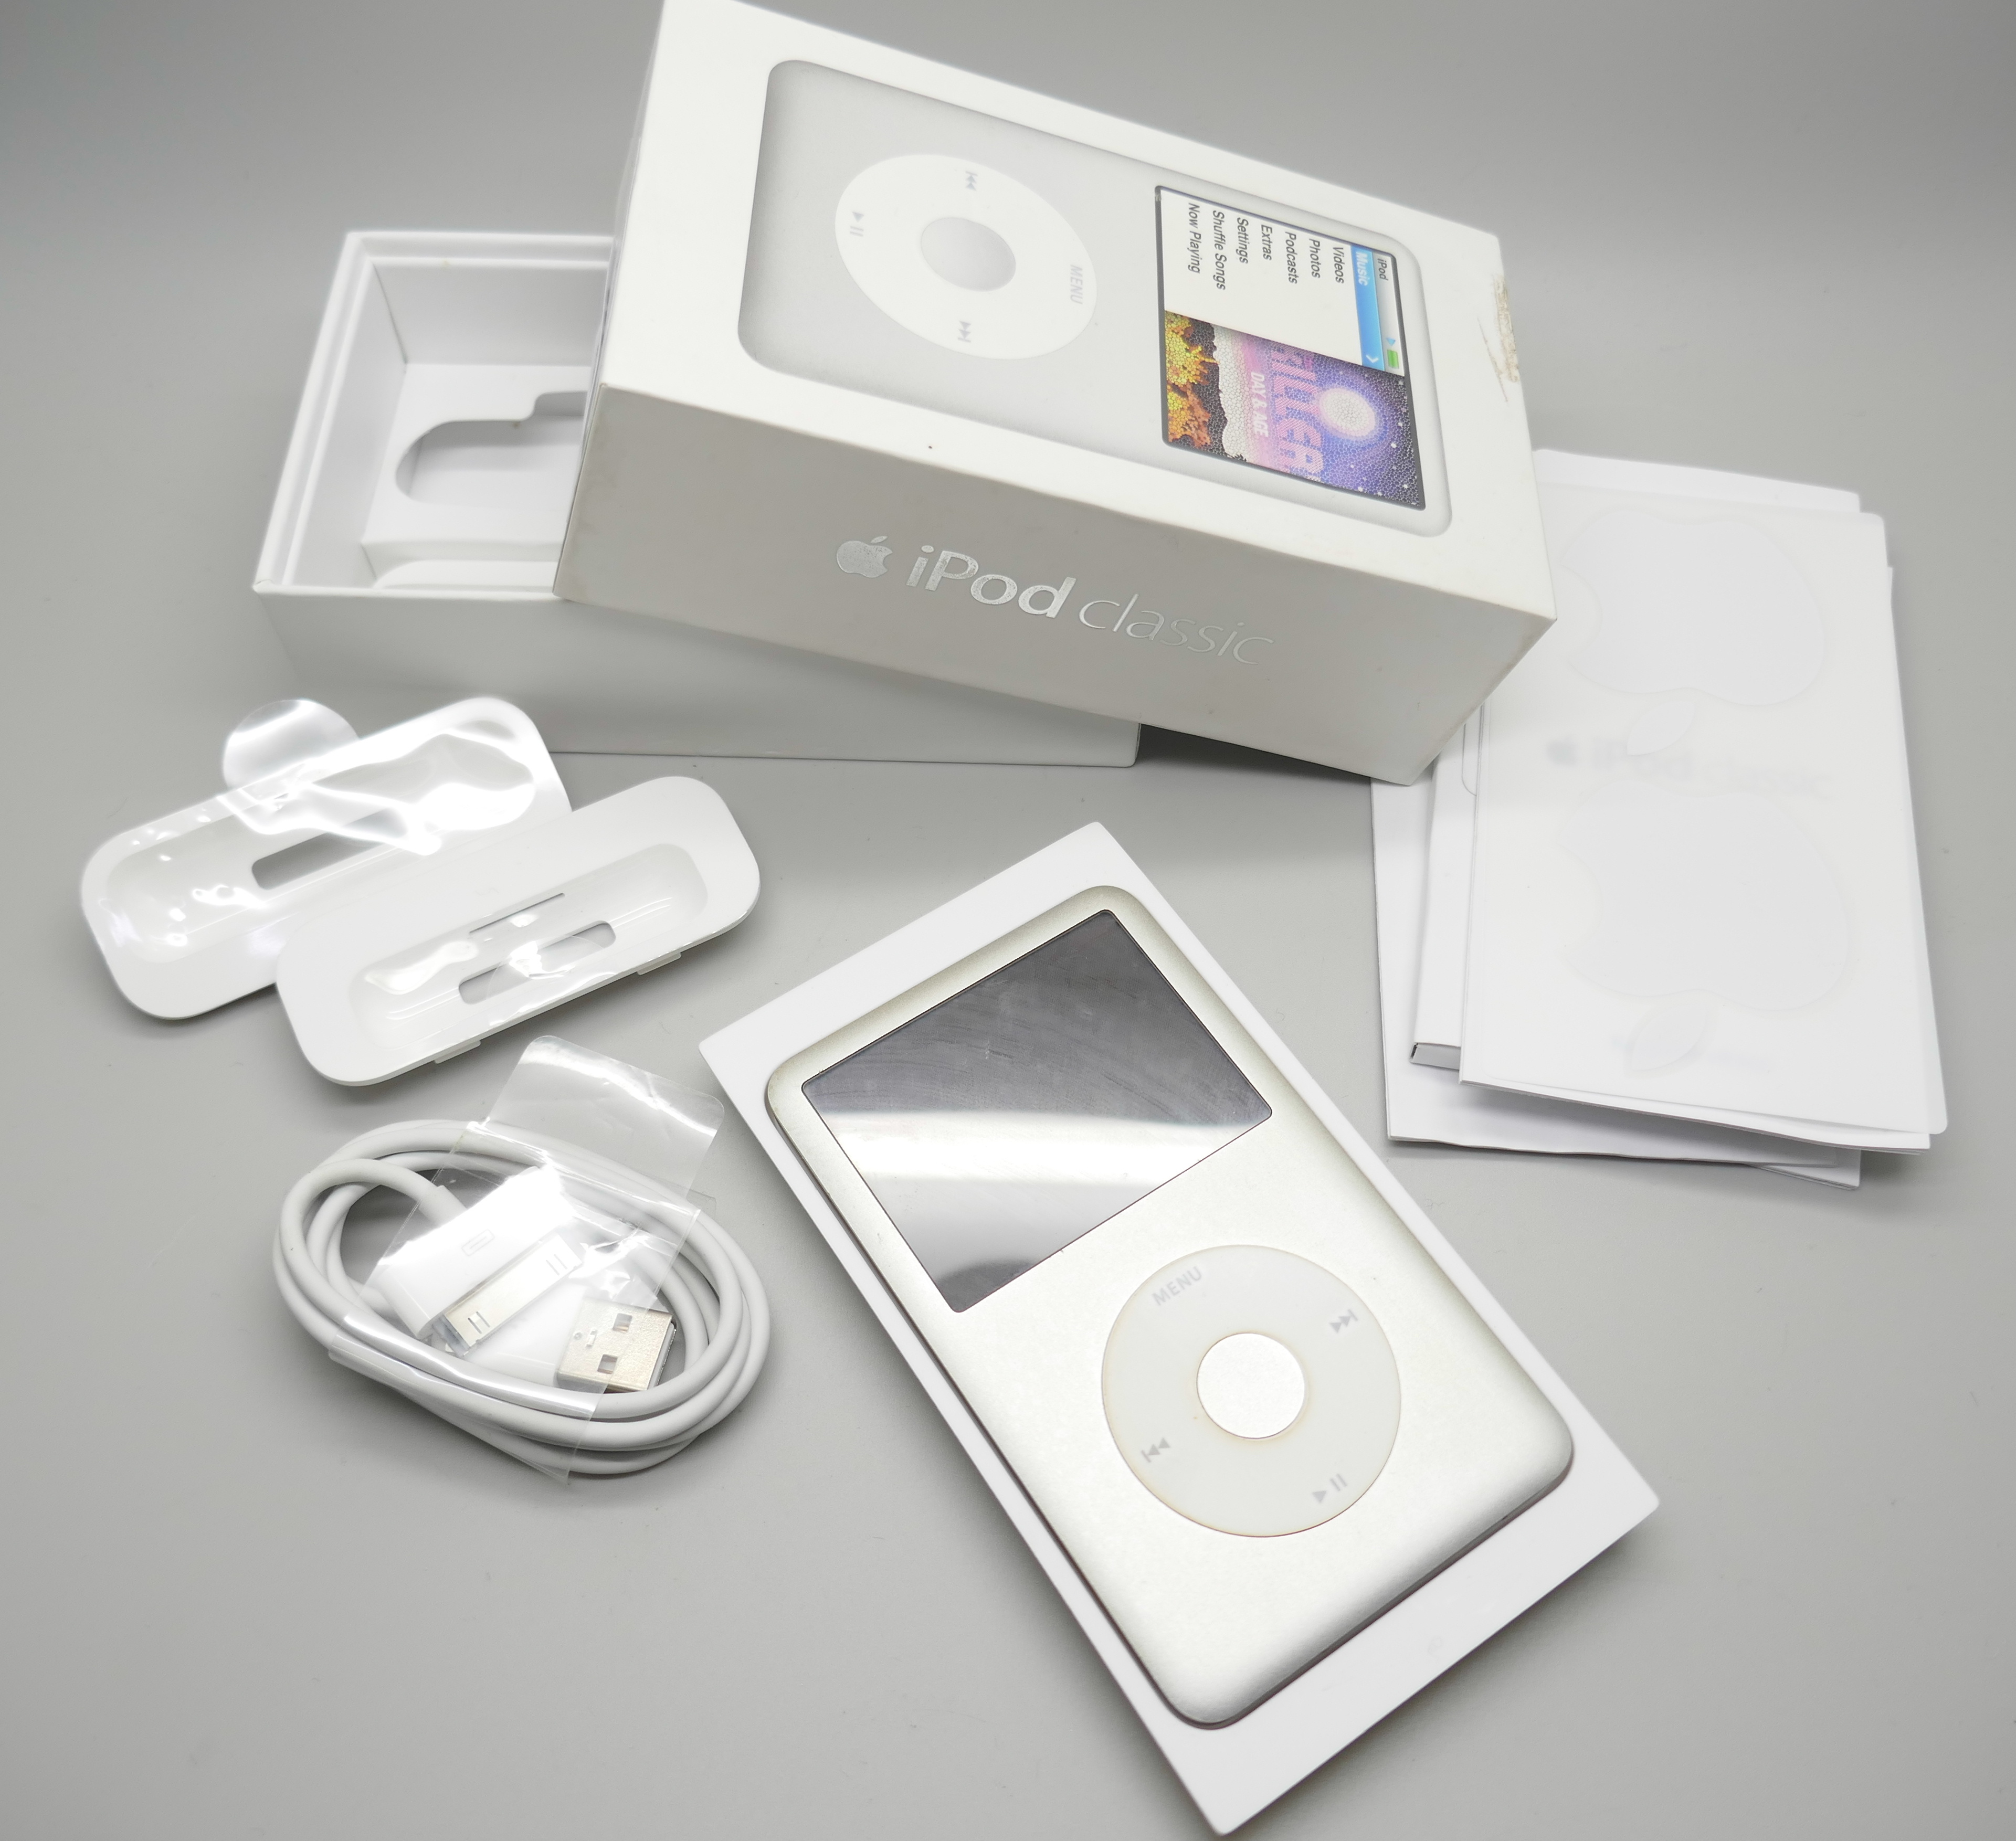 An Apple Ipod Classic - Image 2 of 2